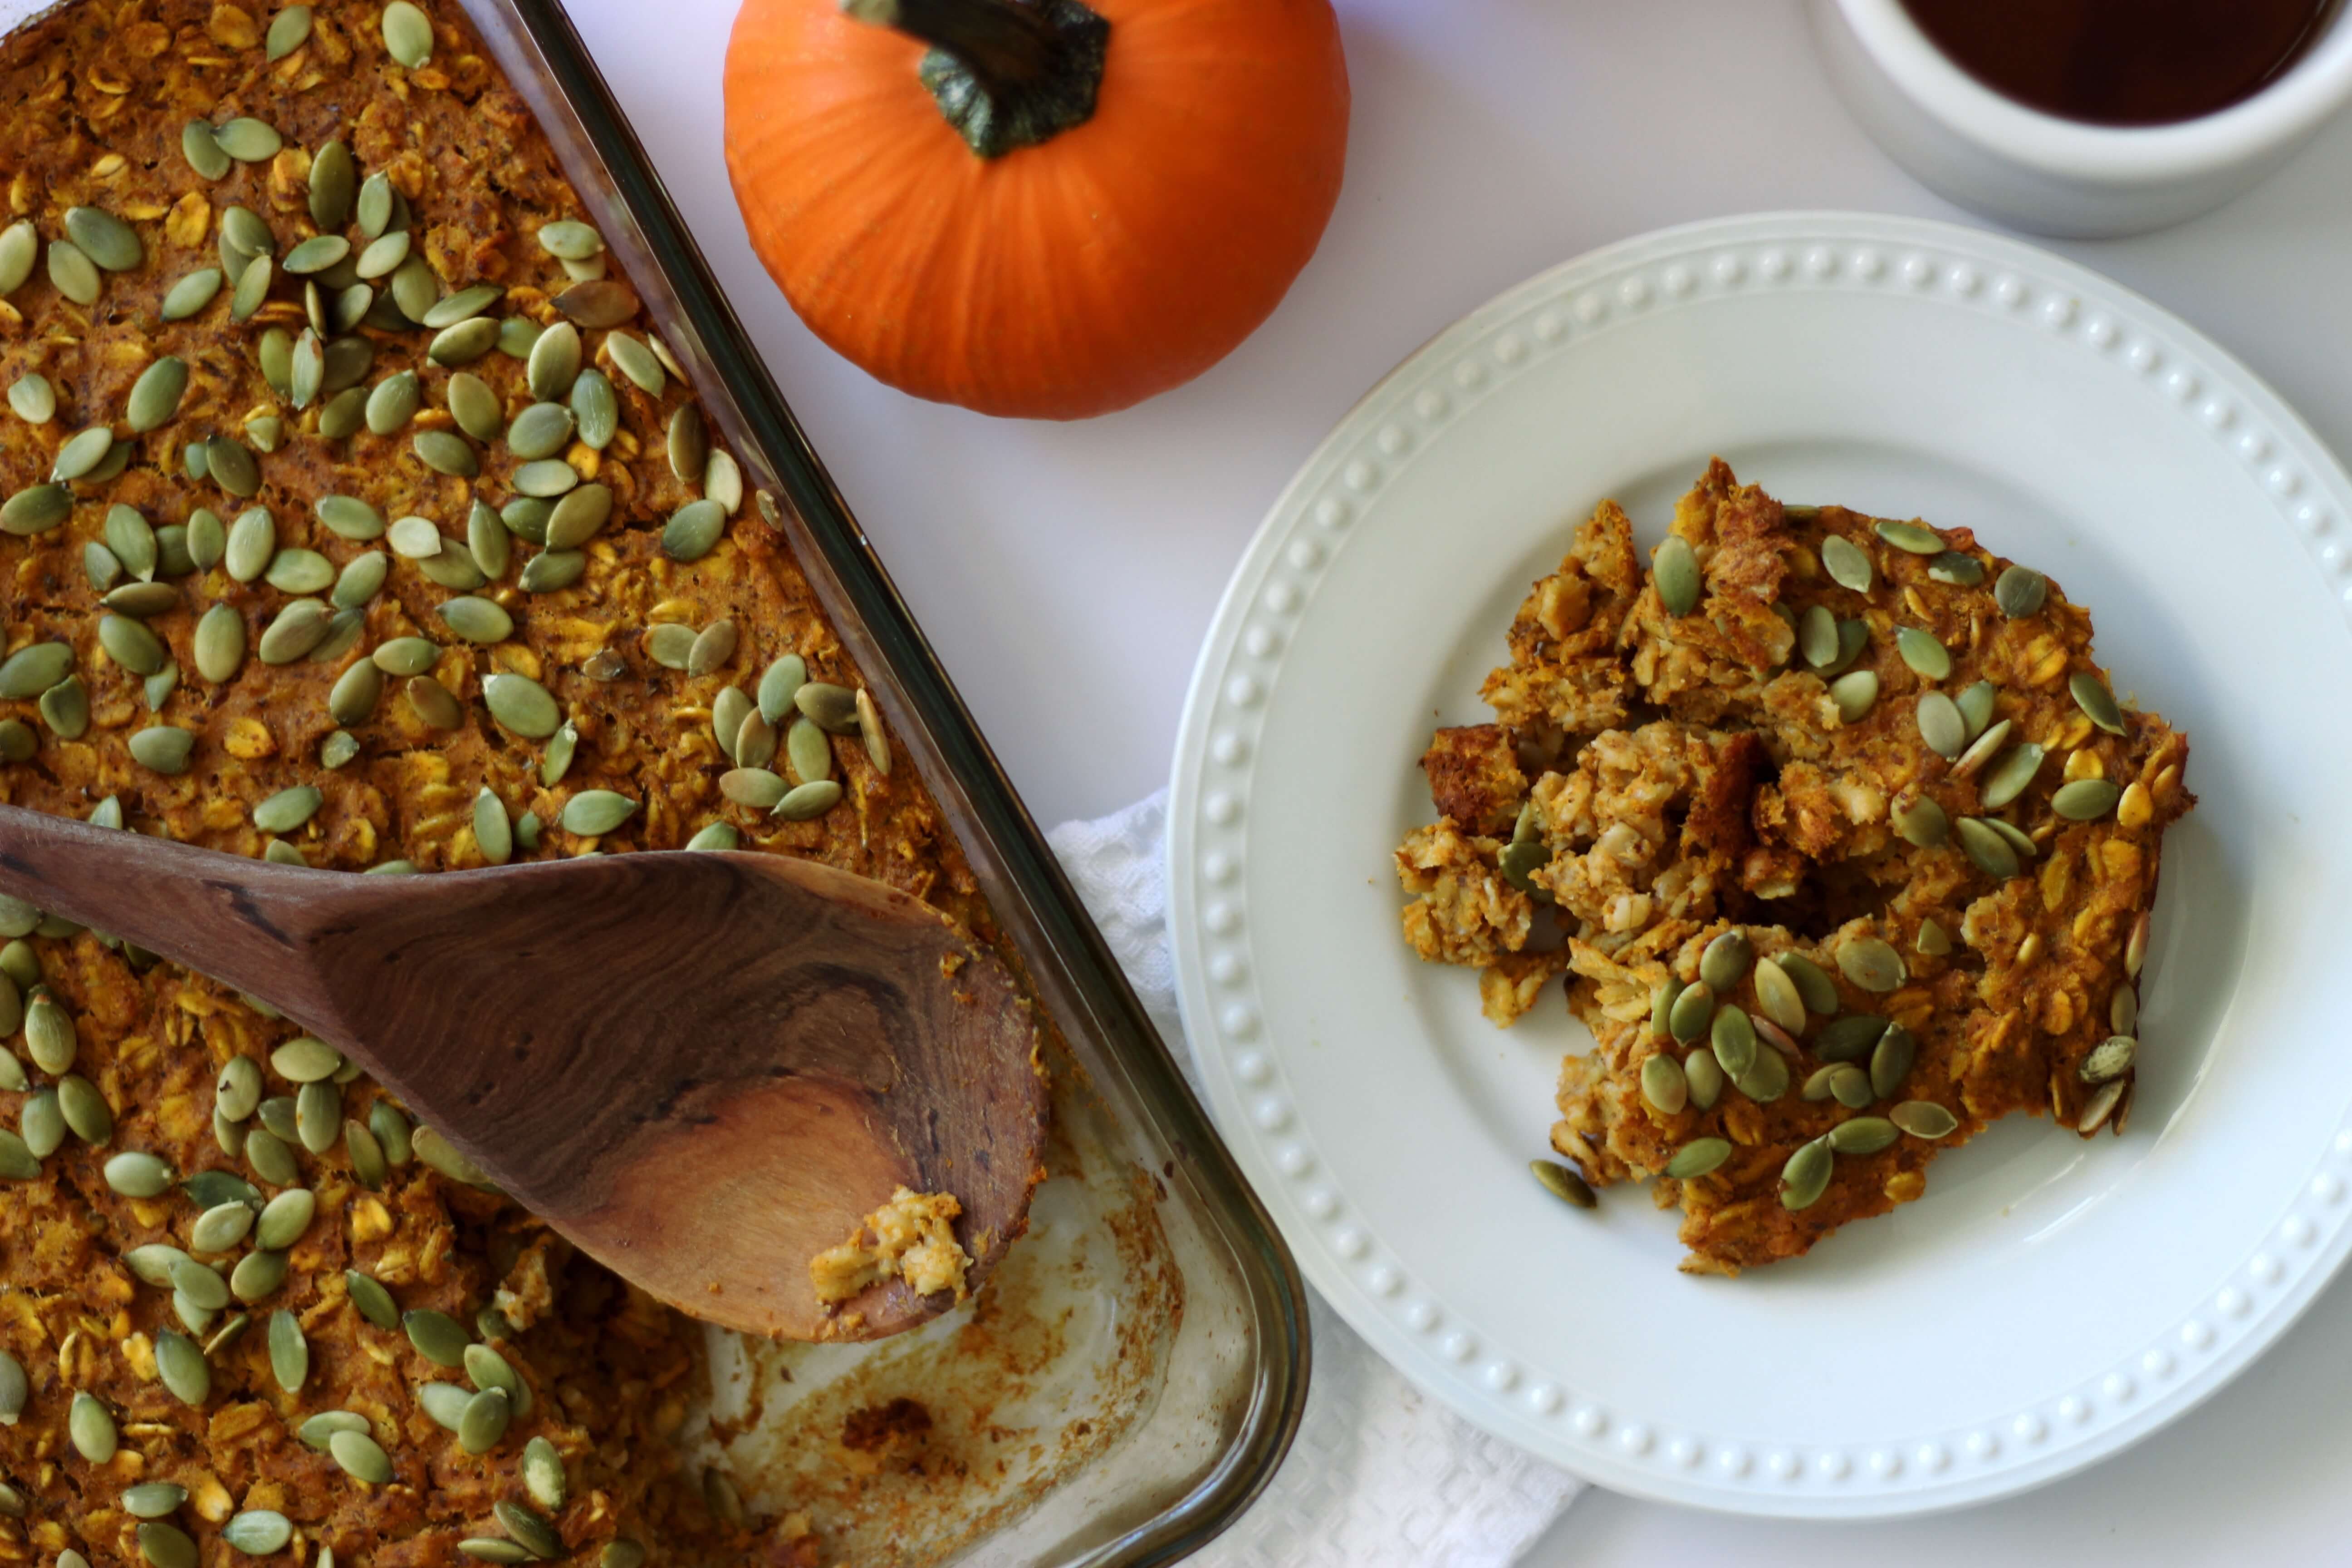 21 One Pan Meal Ideas Your Clients Will Love: Pumpkin Pie Baked Oatmeal